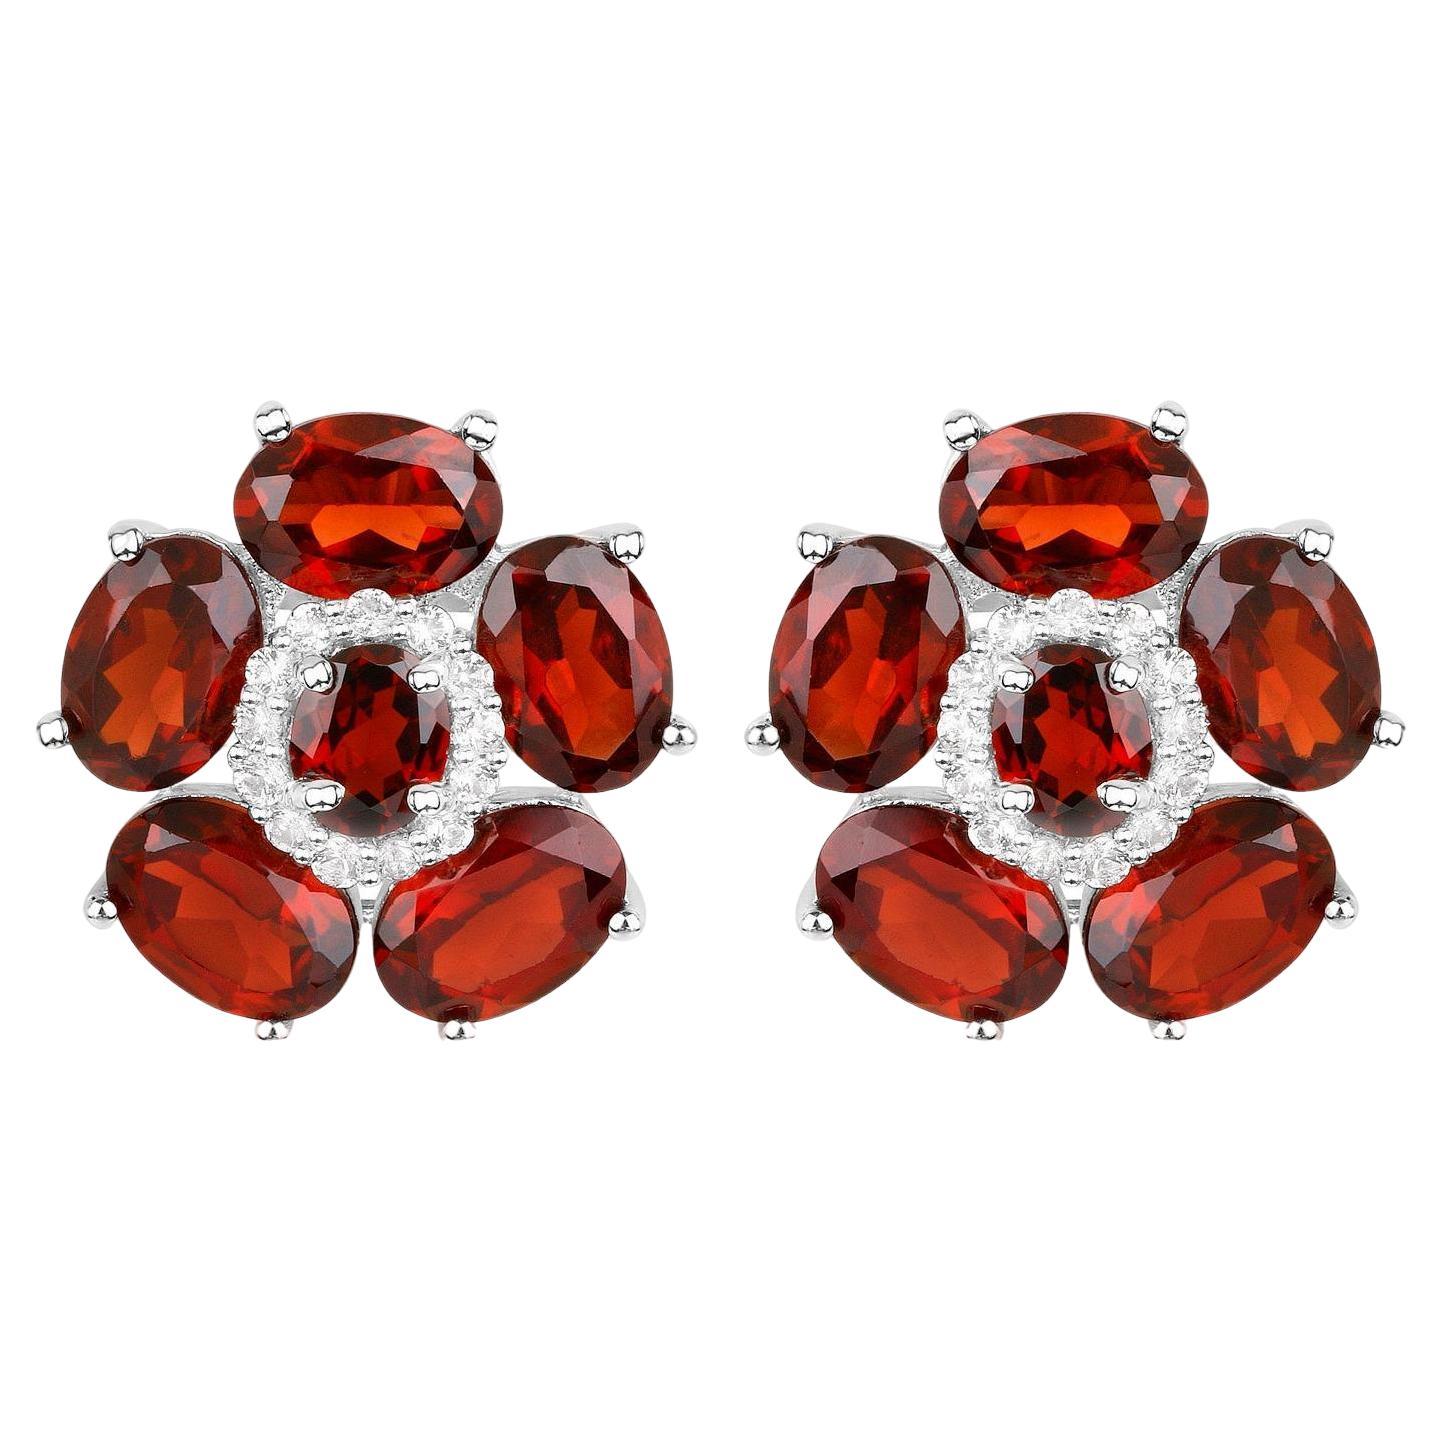 Natural Garnet and White Topaz Floral Earrings 9.6 Carats Total For Sale